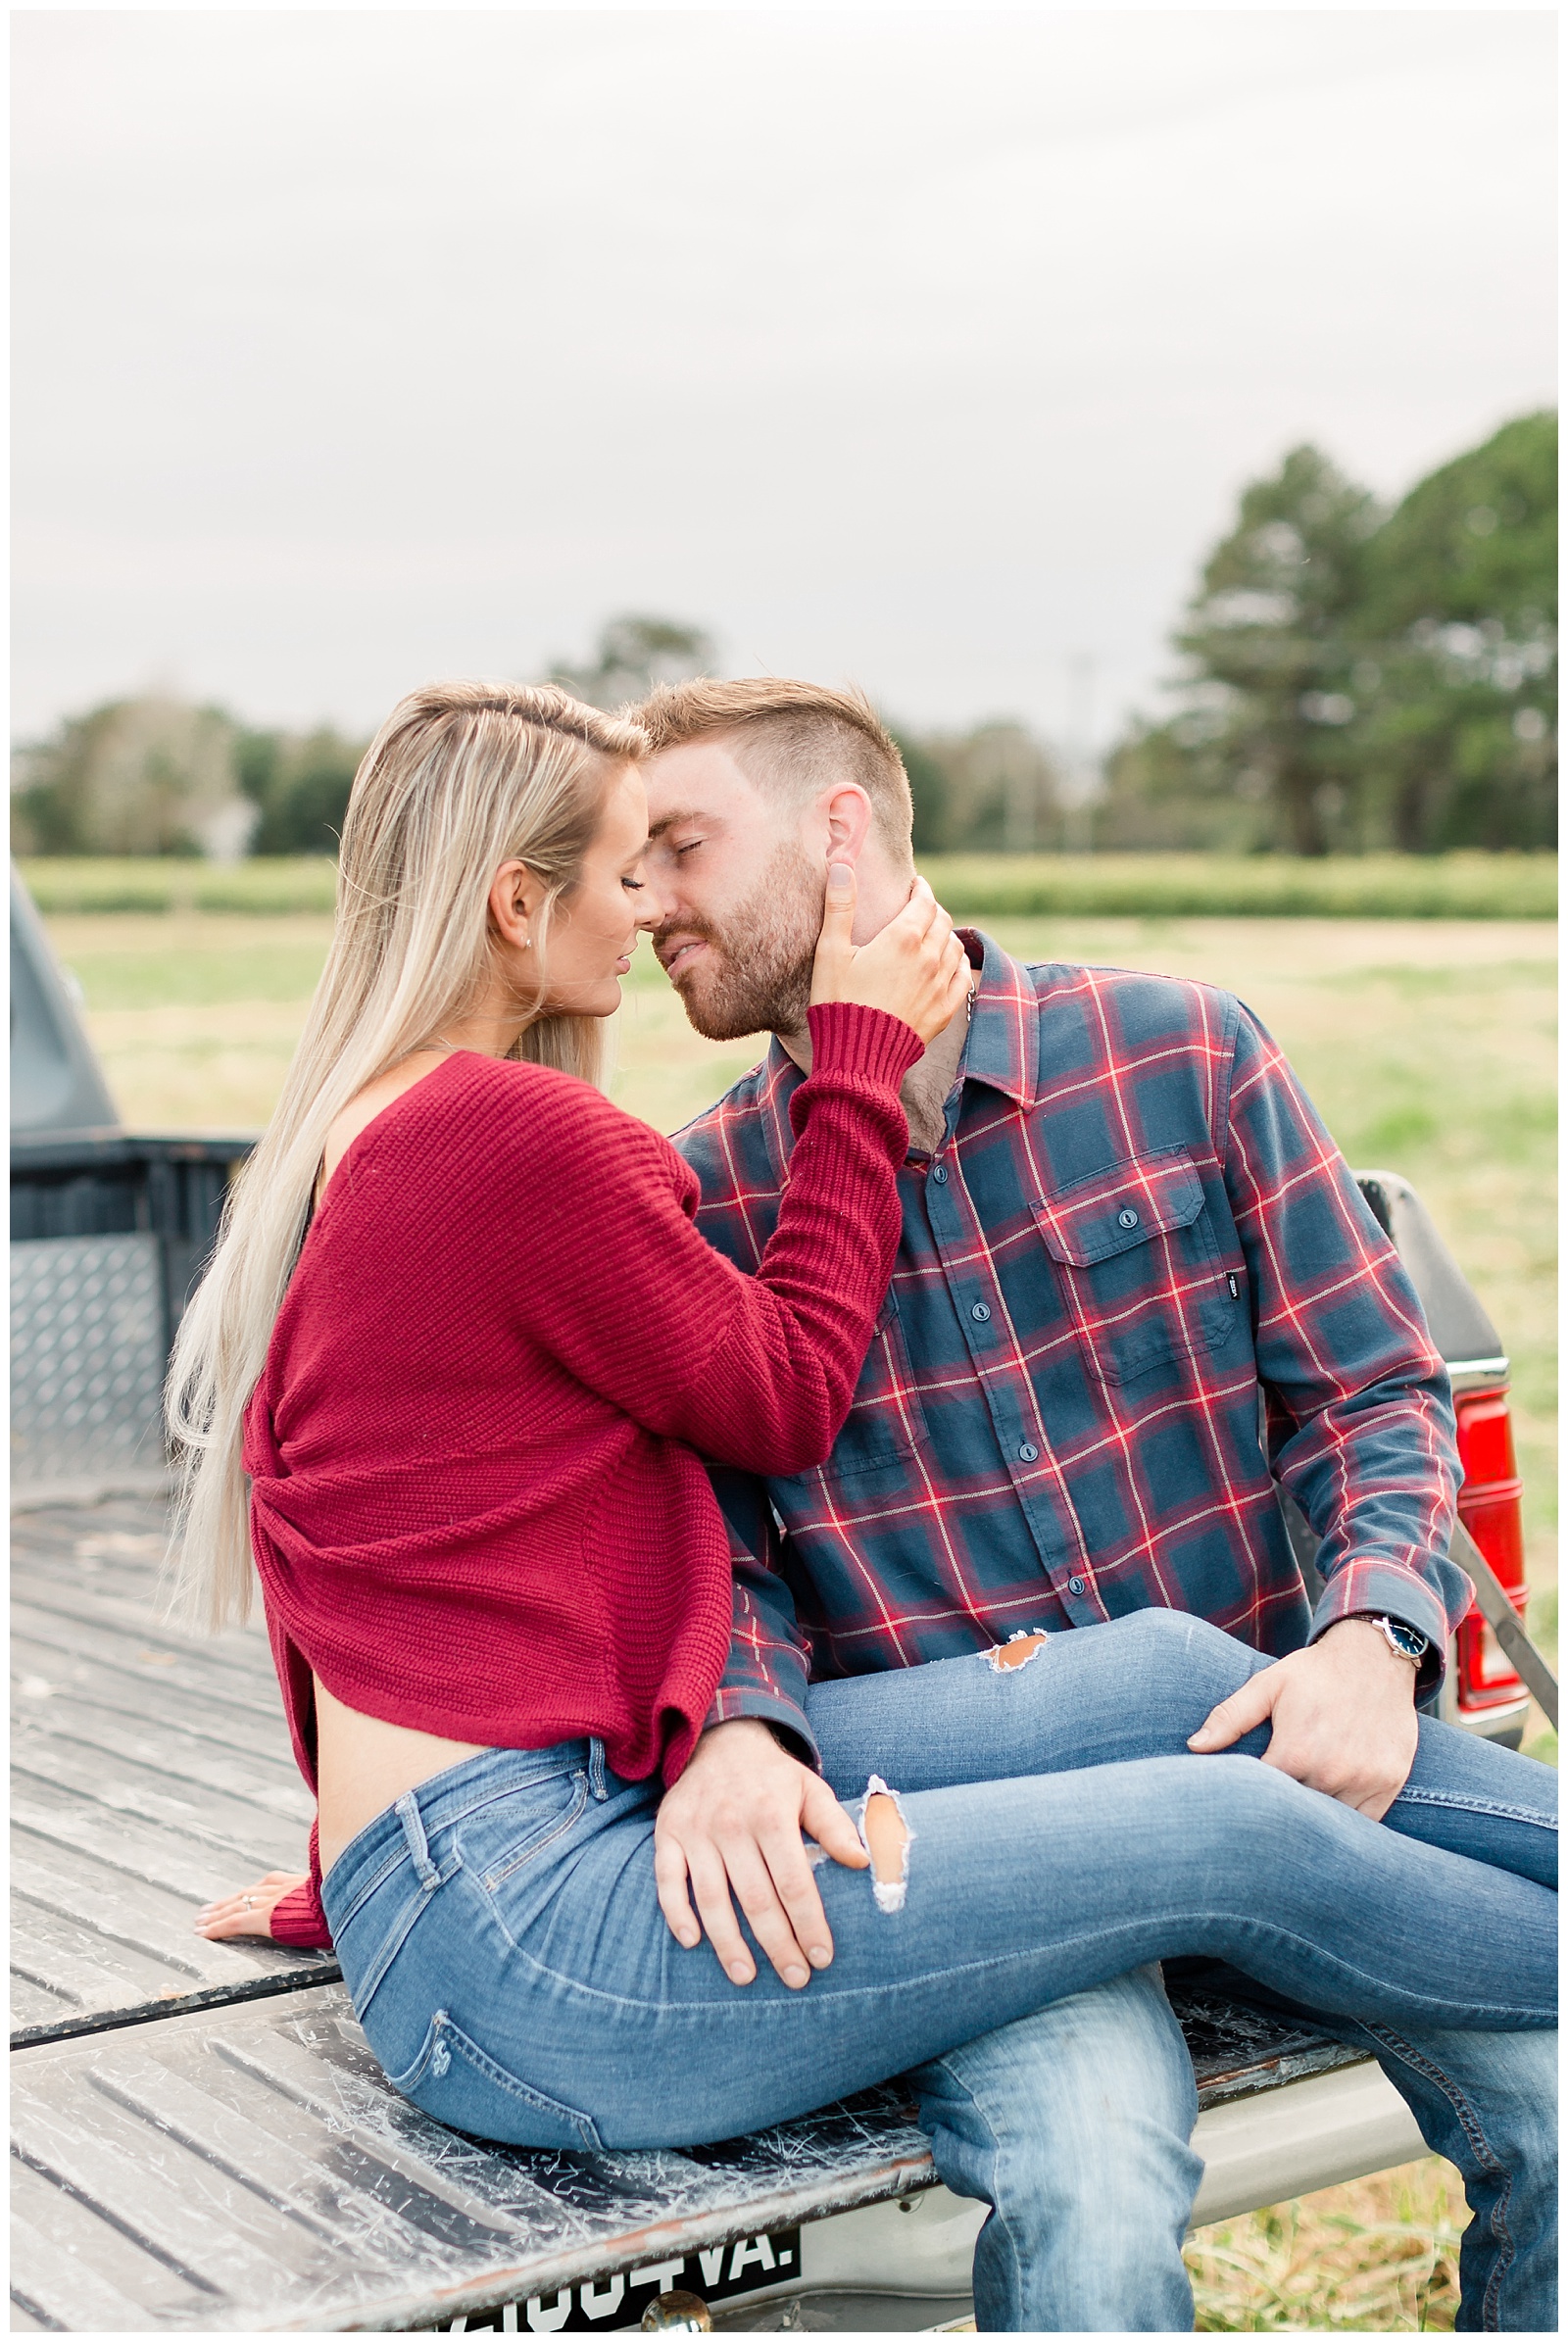 cullipher-farms-engagement-session-46.jpg